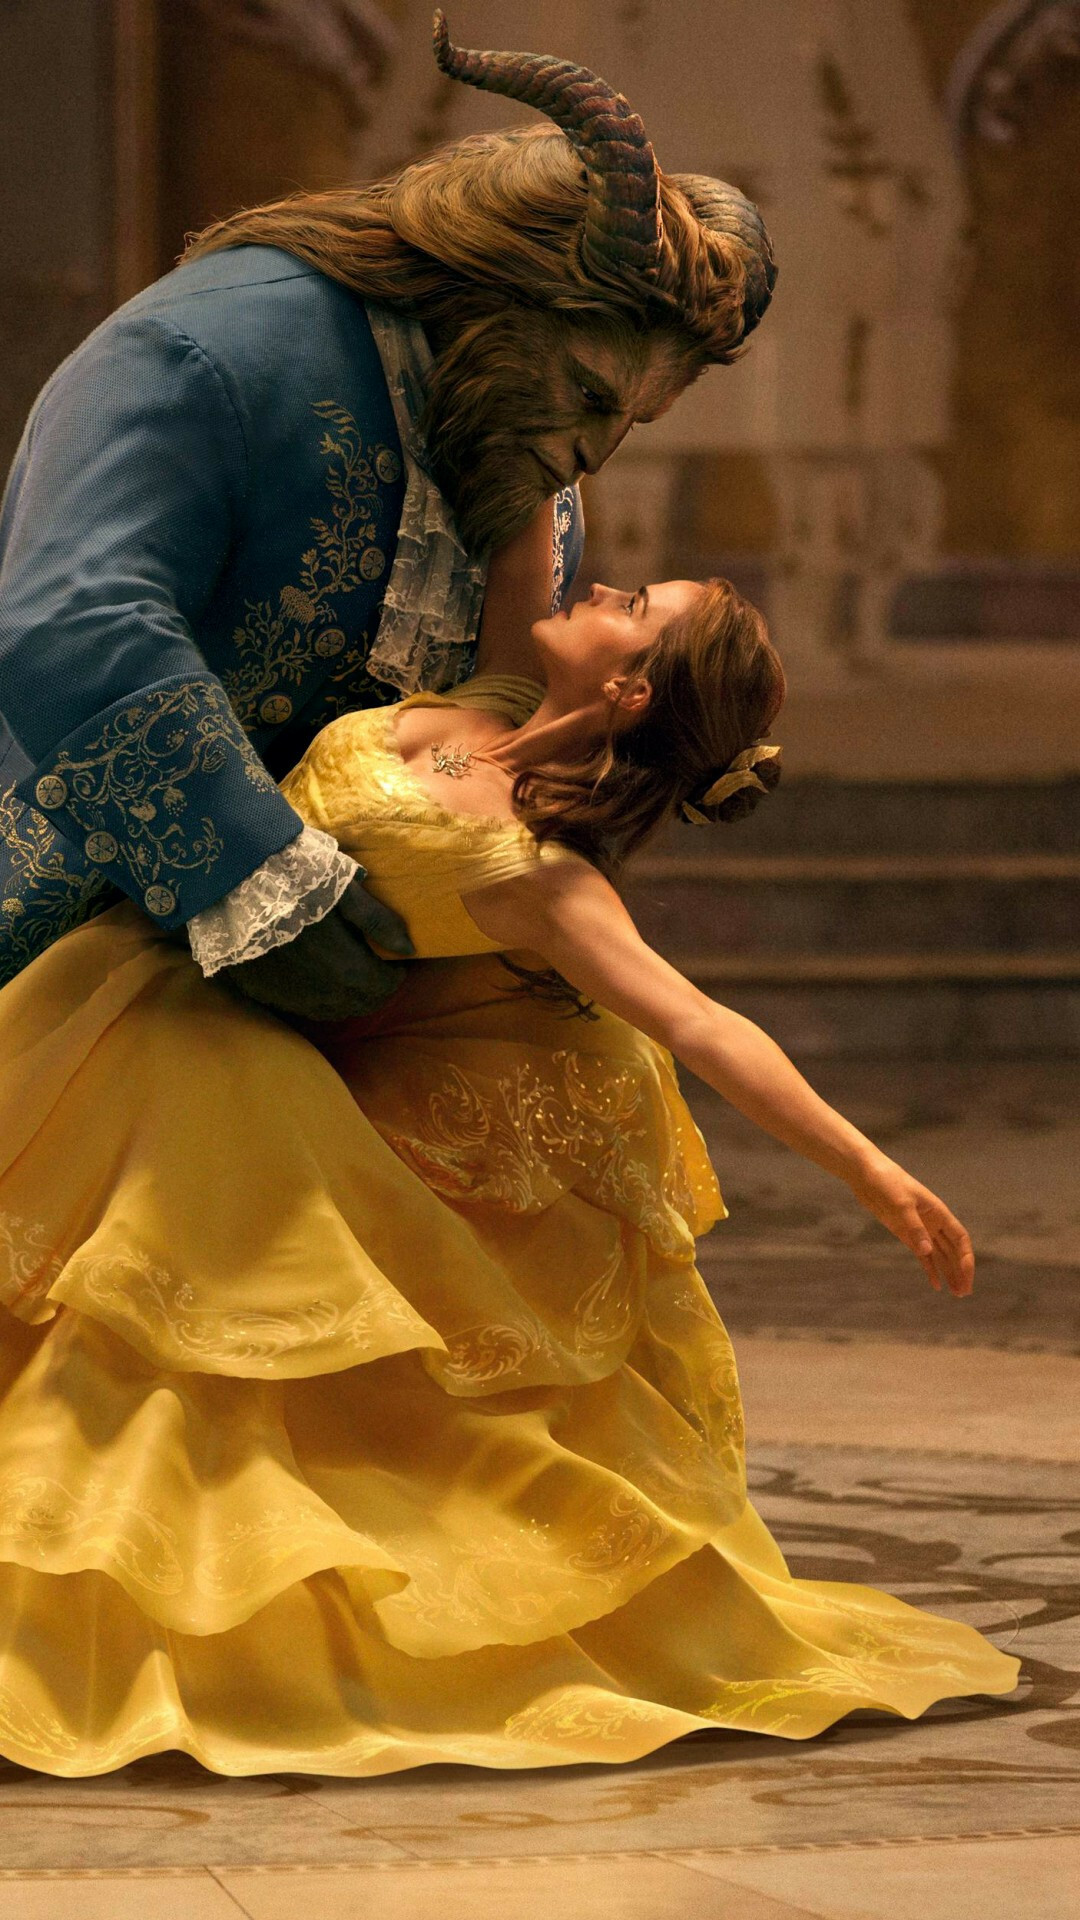 Beauty and the Beast: Emma Watson, Dan Stevens, A prince who has been transformed into a monster. 1080x1920 Full HD Wallpaper.